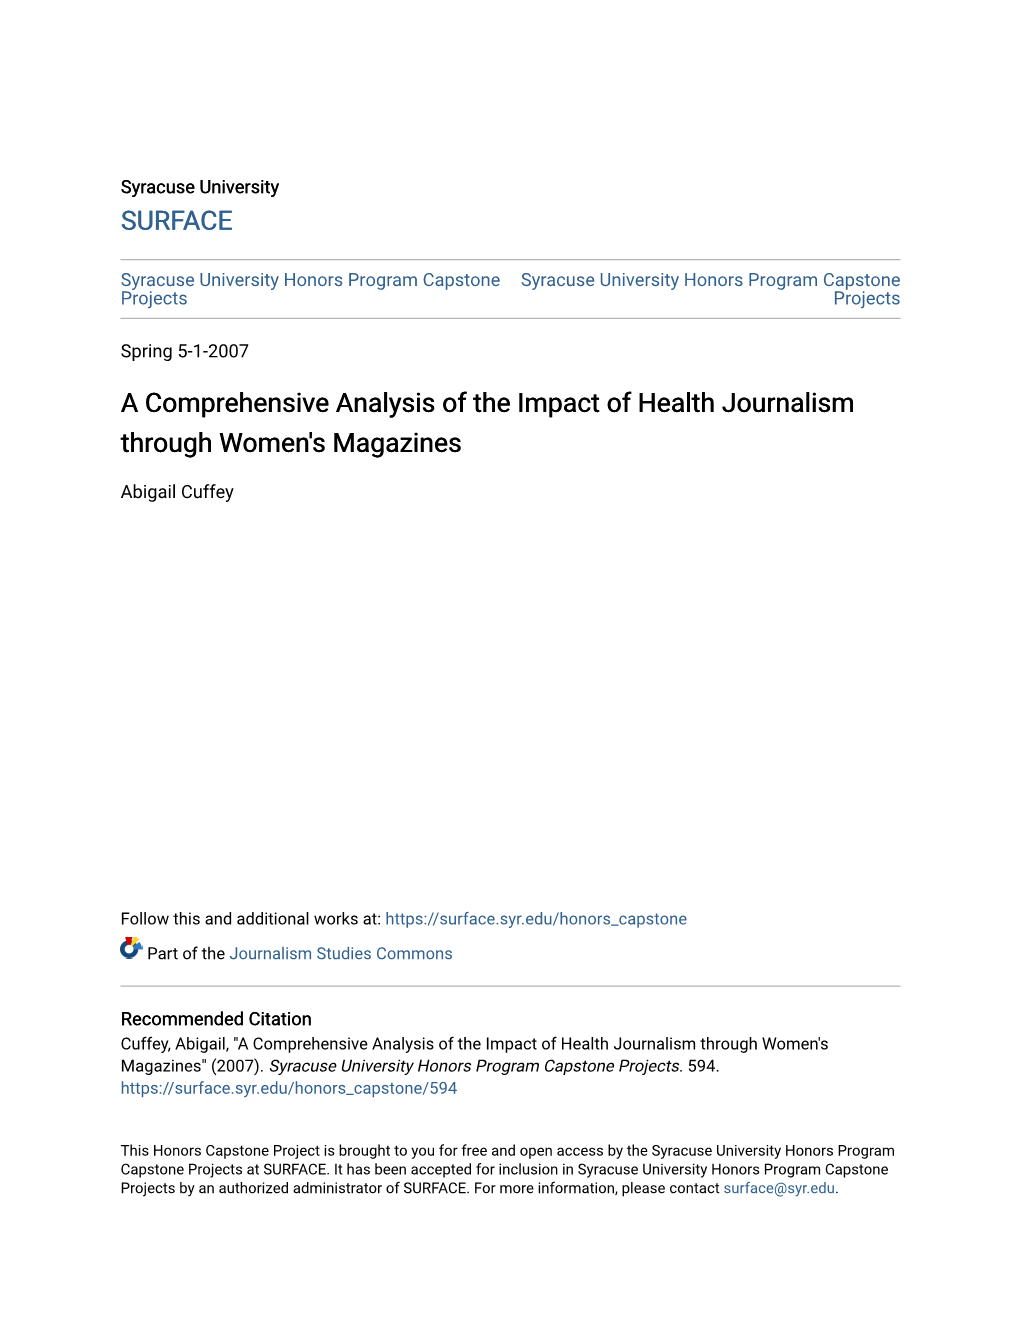 A Comprehensive Analysis of the Impact of Health Journalism Through Women's Magazines